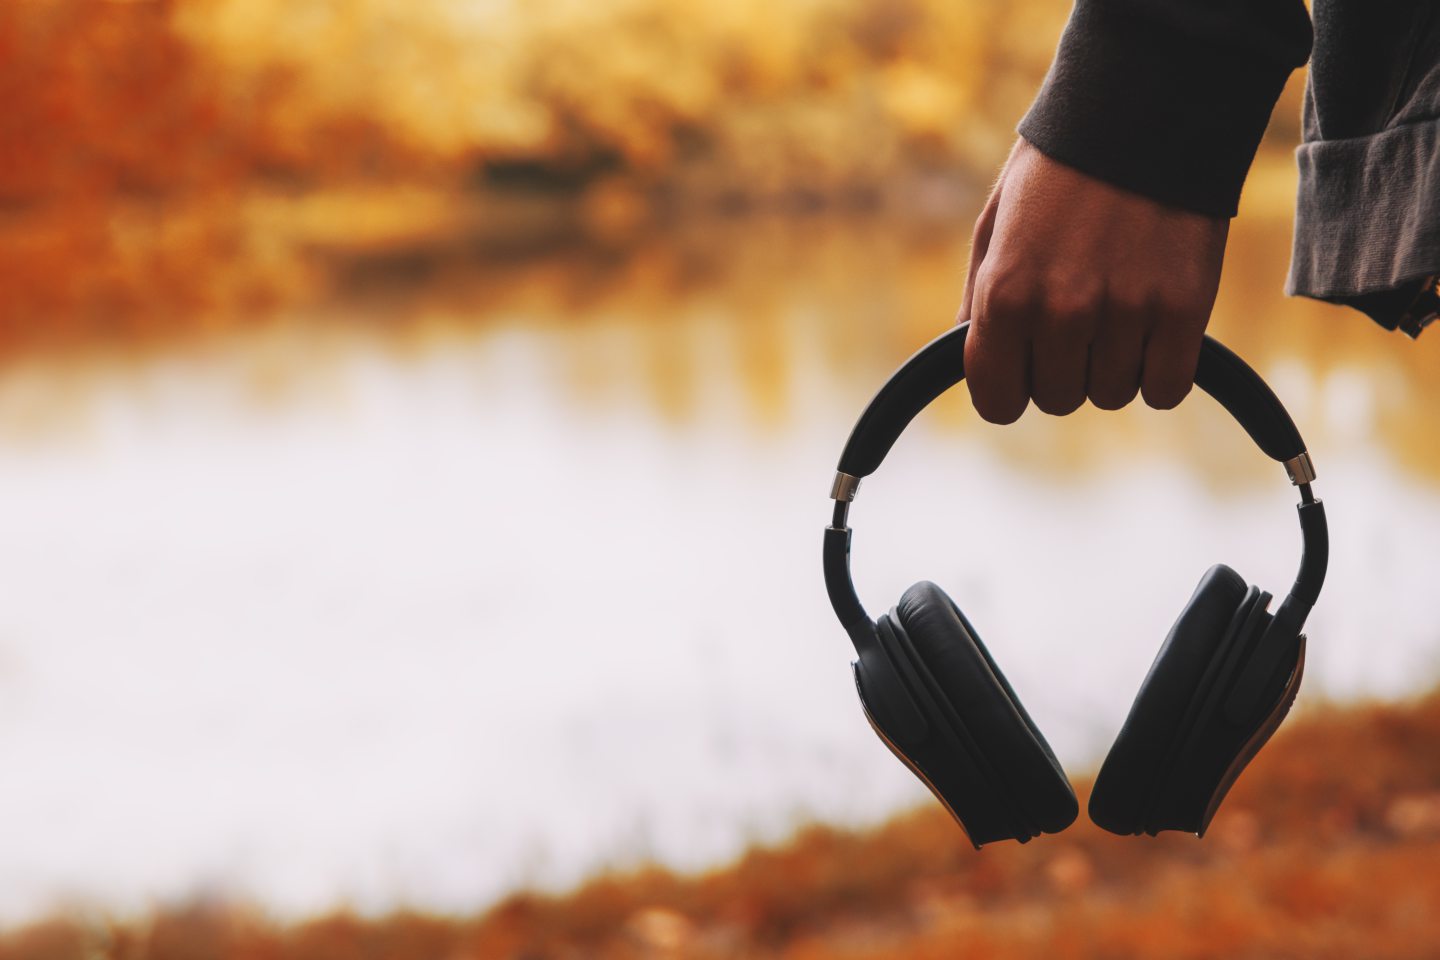 Podcast, audio books or music can help you to switch off and relax while walking